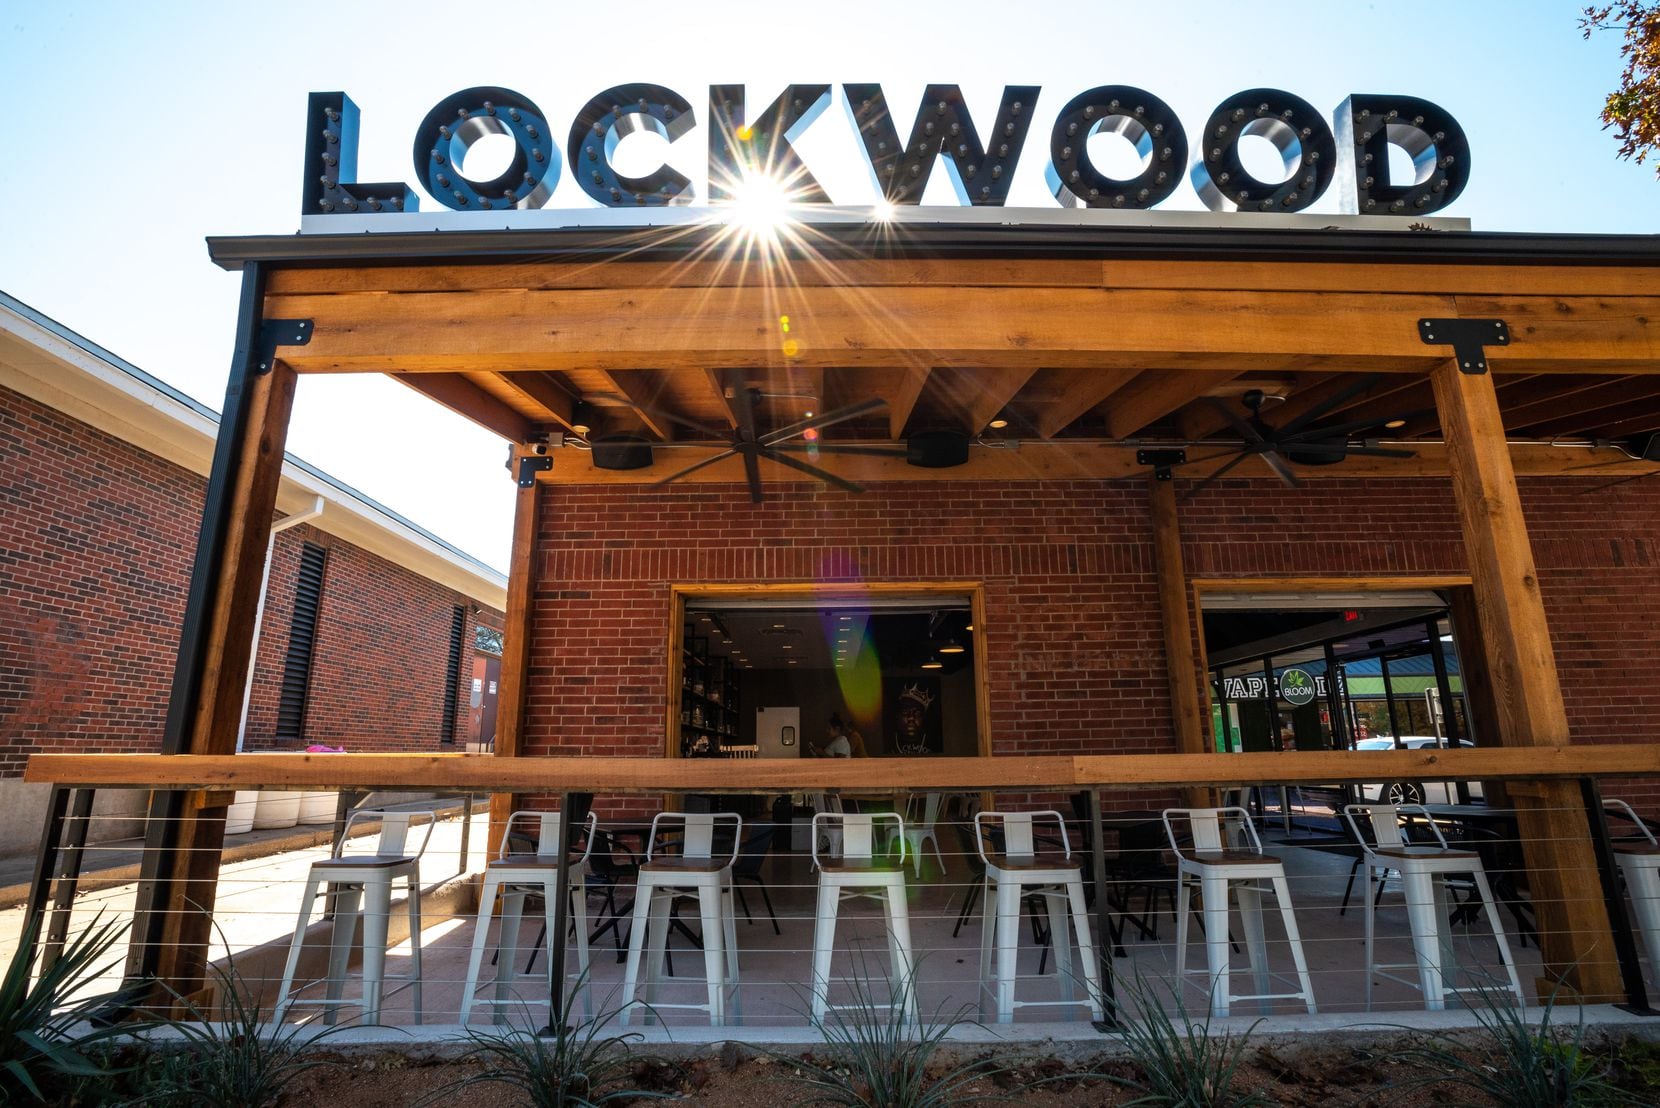 Lockwood Distilling Company in Fort Worth has a lovely patio that looks out onto Magnolia Avenue.